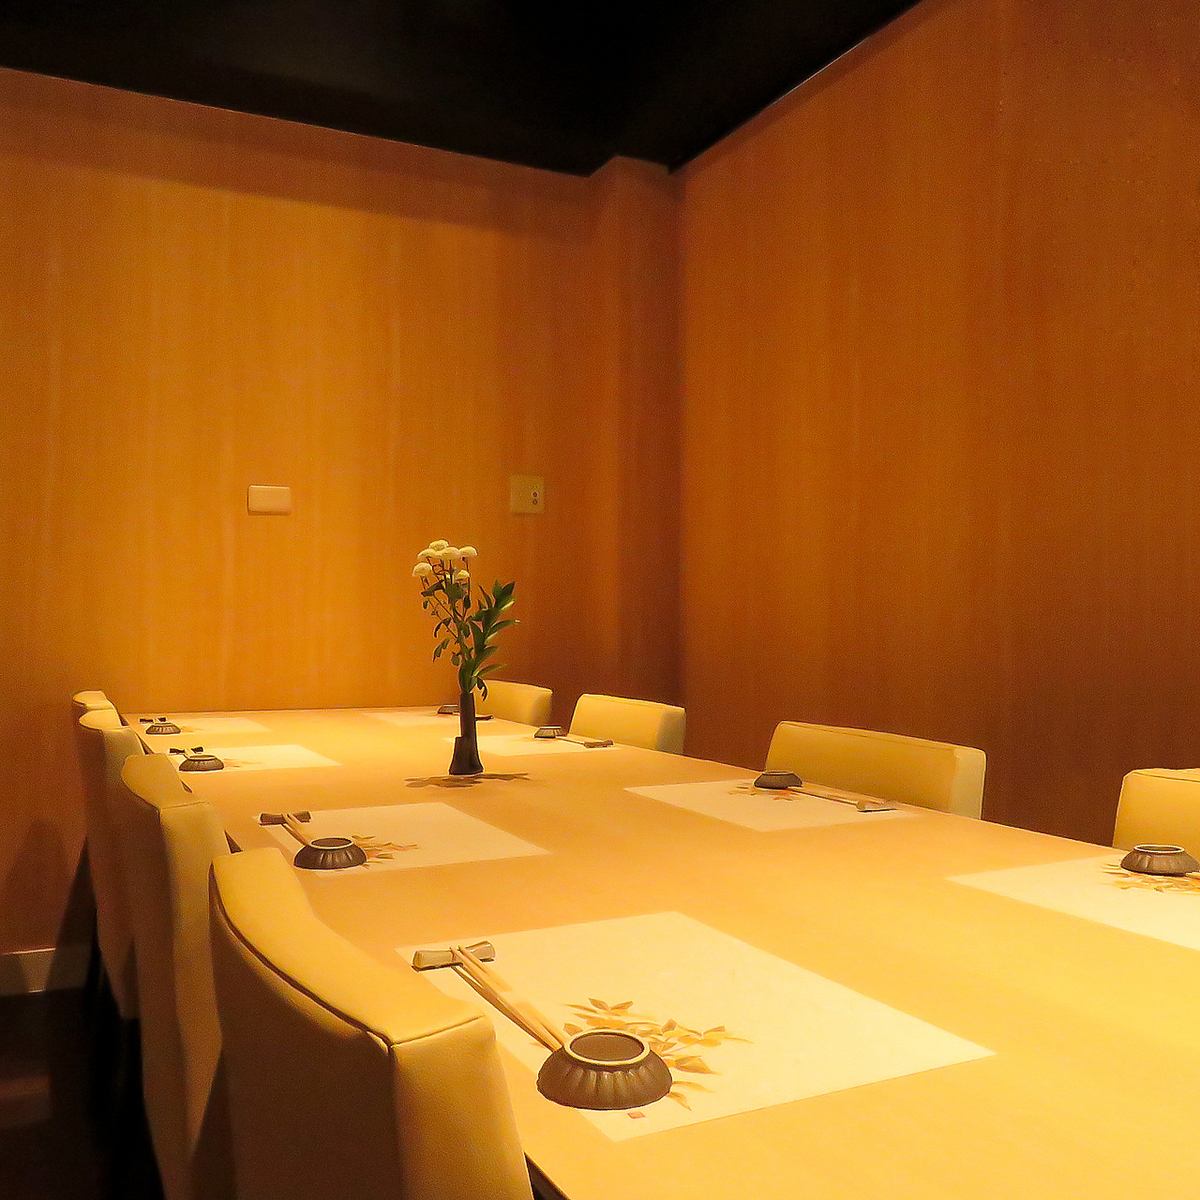 Enjoy at the counter or enjoy your time together in a private room.